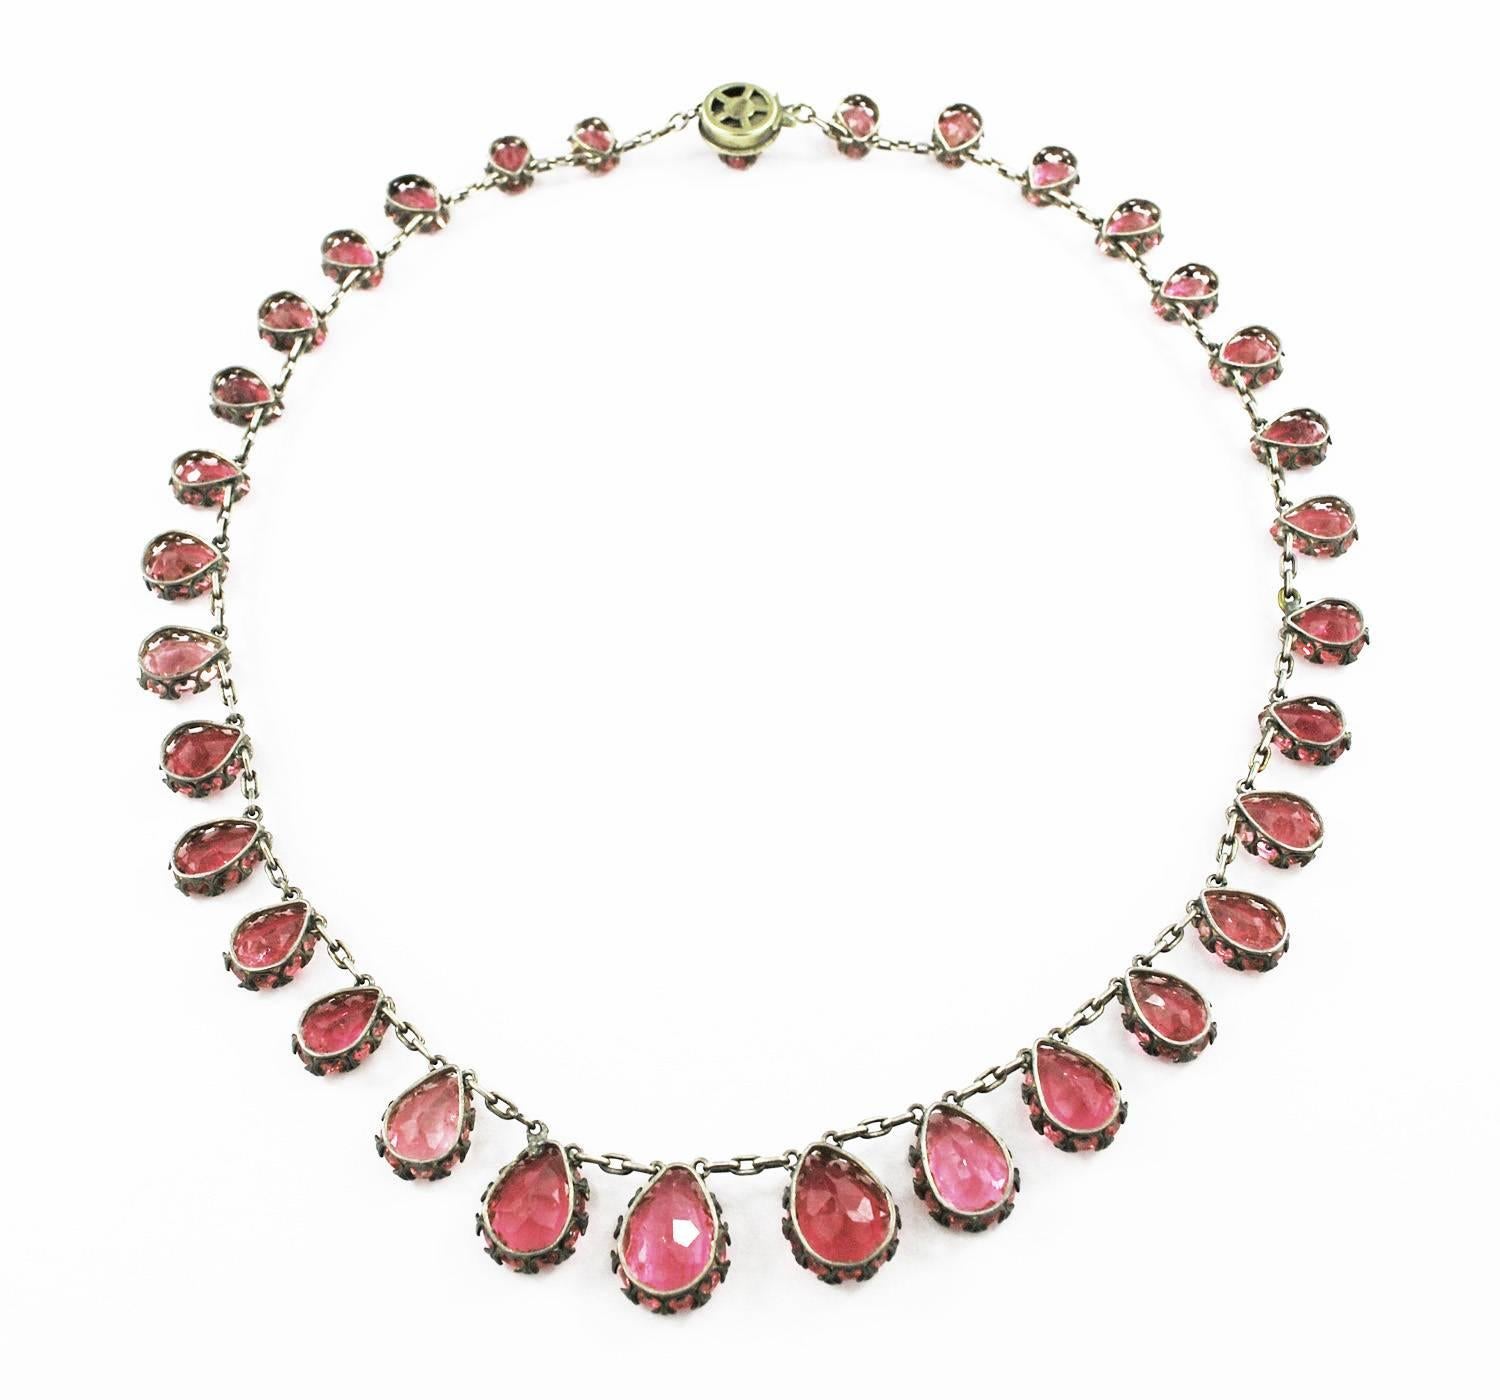 A rare natural pink tourmaline necklace from the end of 19th century. Necklace has 33 pear cut tourmalines with a total weight of 65 cts. The stones are in open back silver settings. 

The largest center tourmaline is 15 mm x 10 mm. Stones color